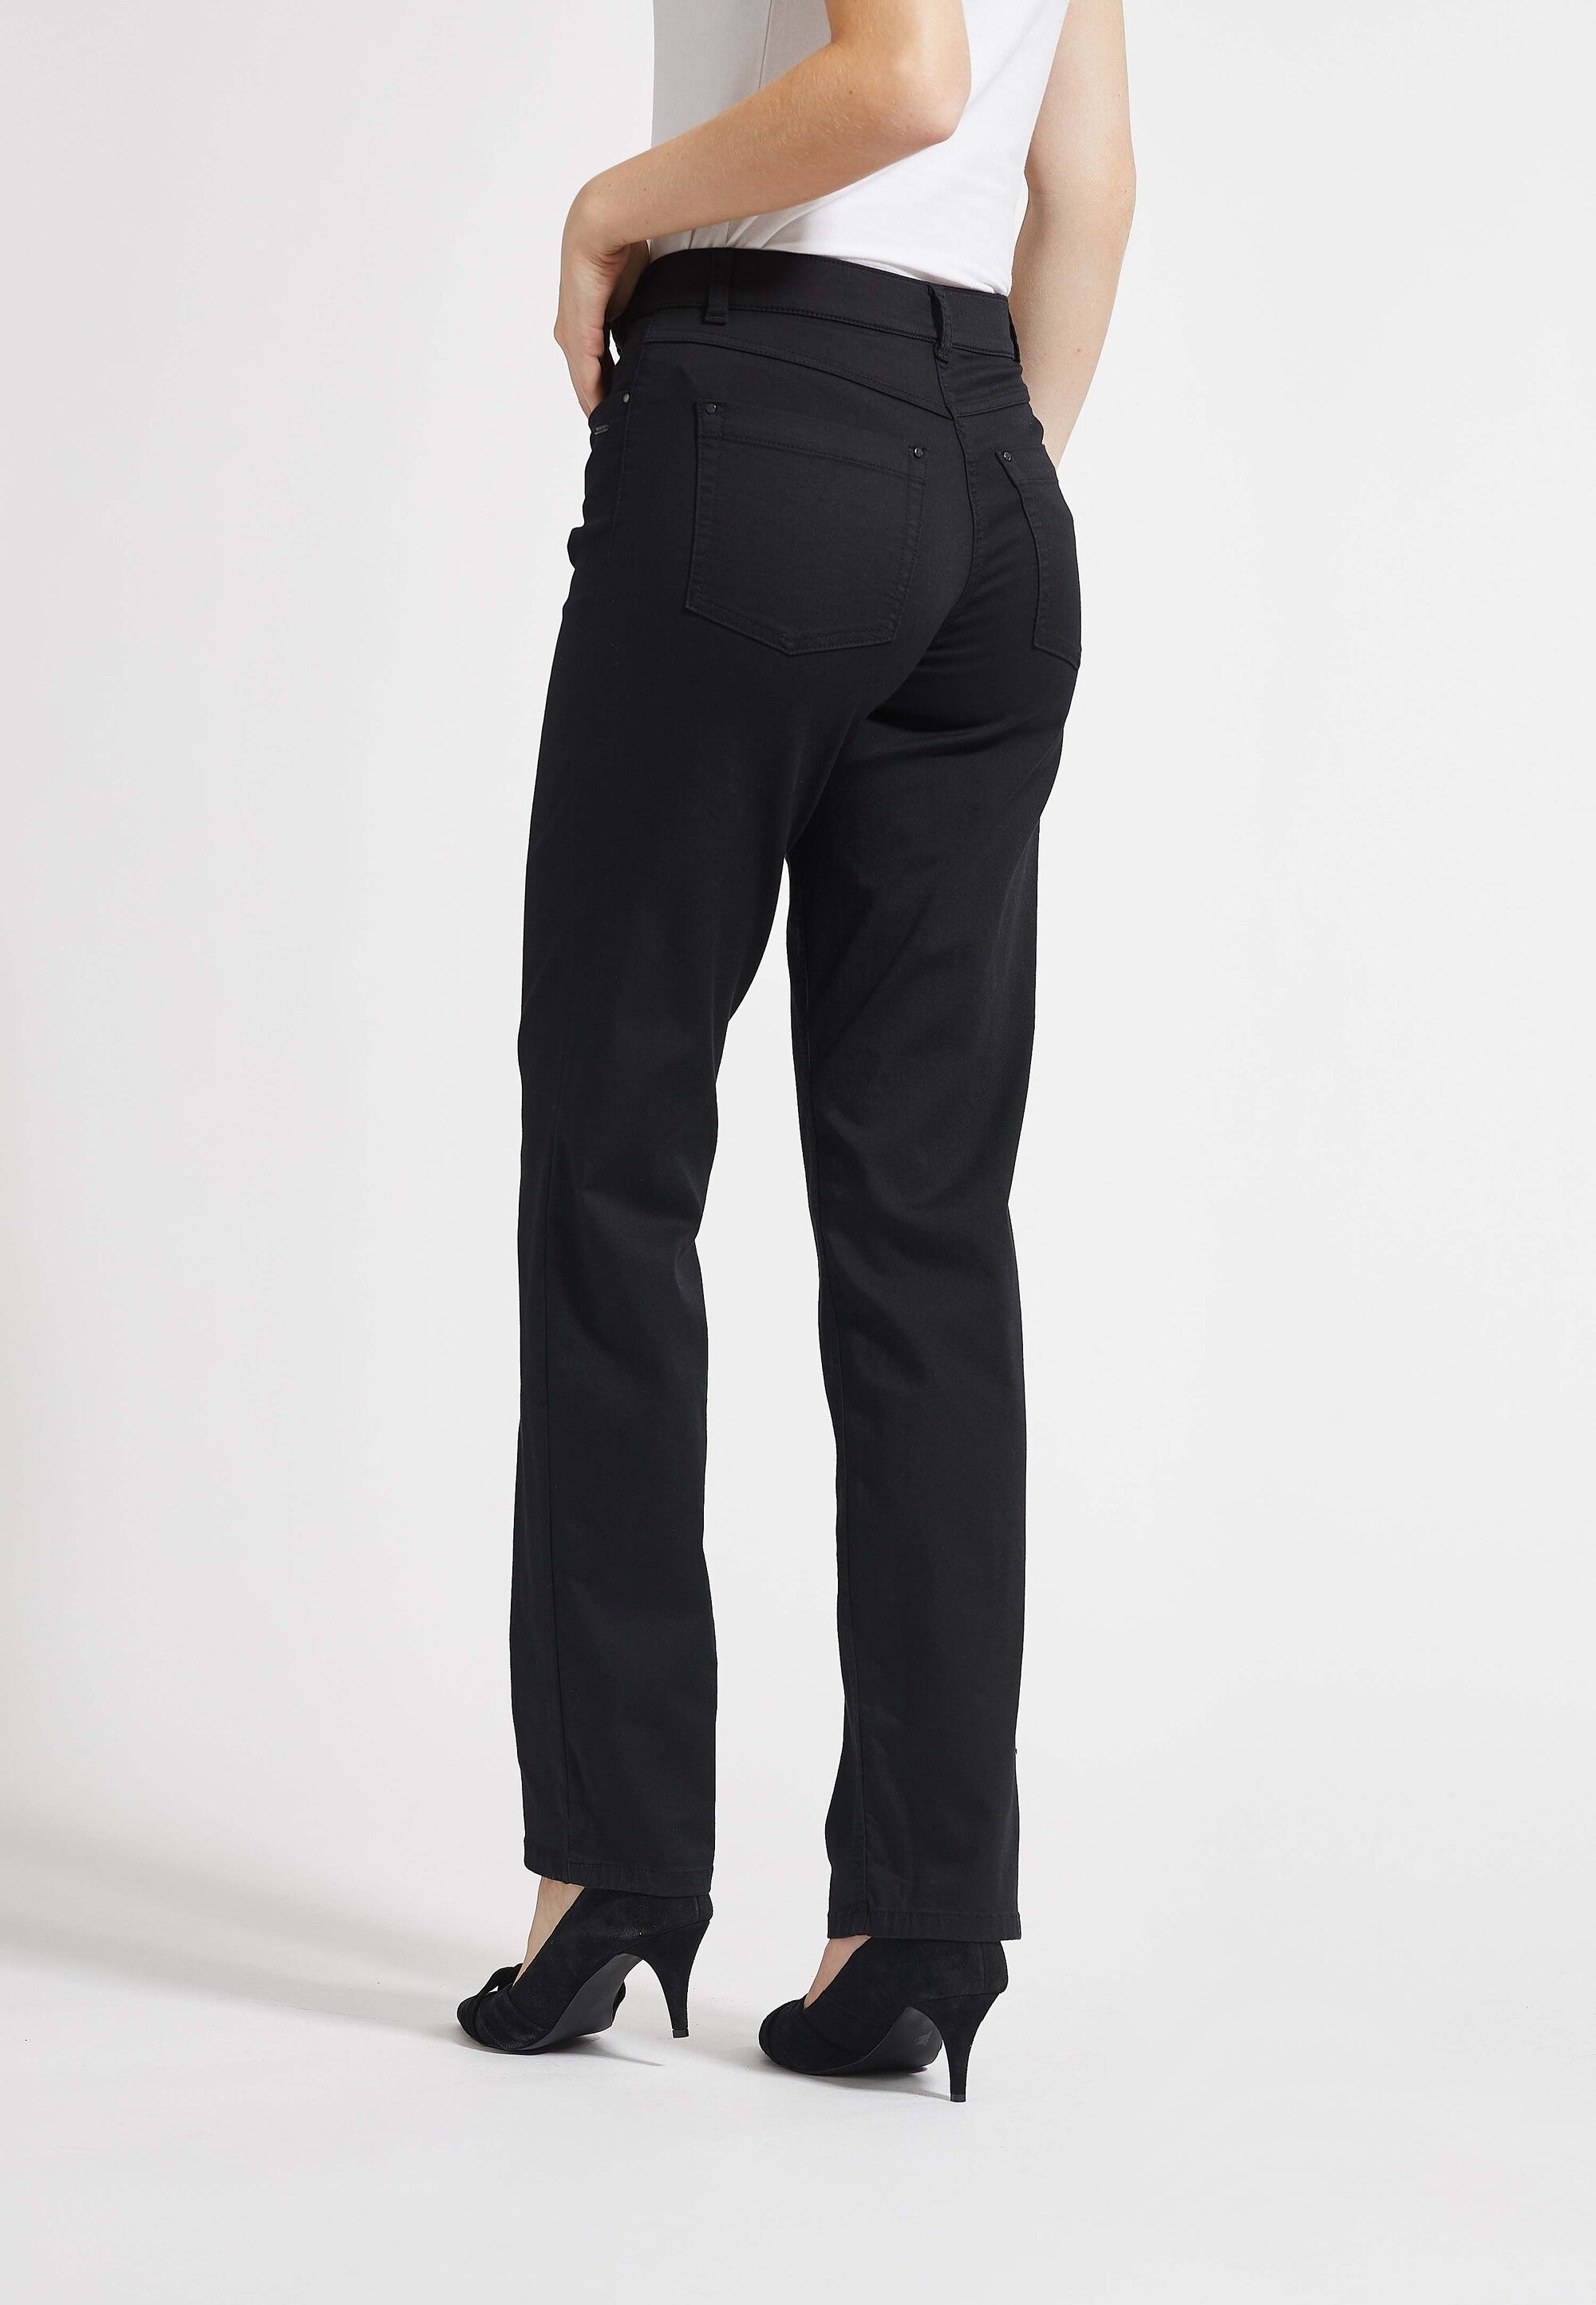 LAURIE Amelia Straight - Long Length Trousers STRAIGHT 99100 Black